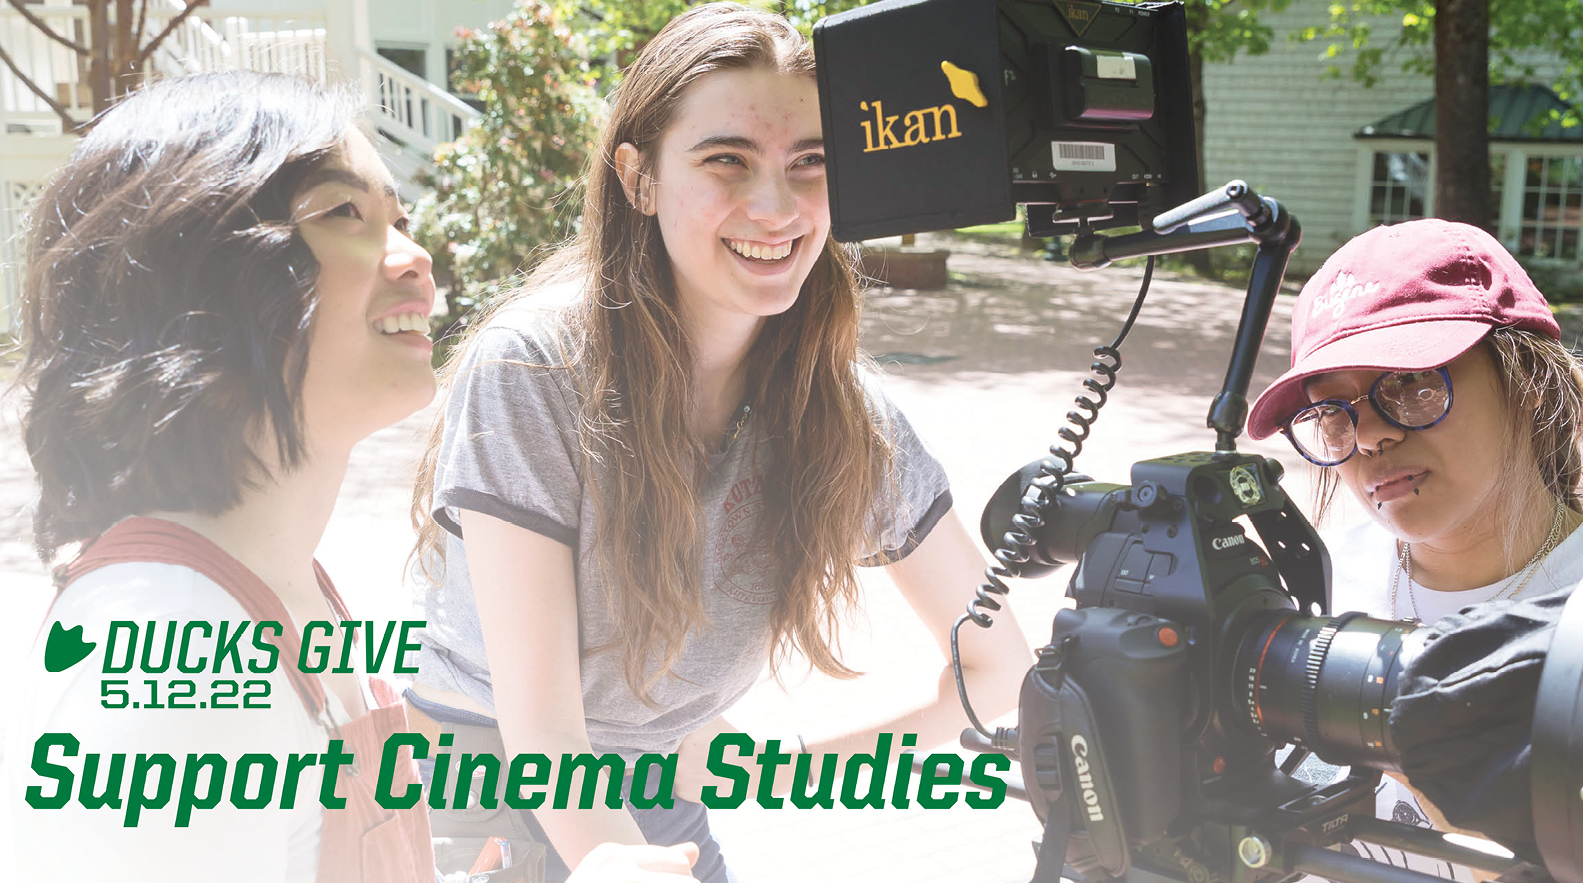 Ducks Give May 12 2022. Support Cinema Studies. three students with an iKan camera